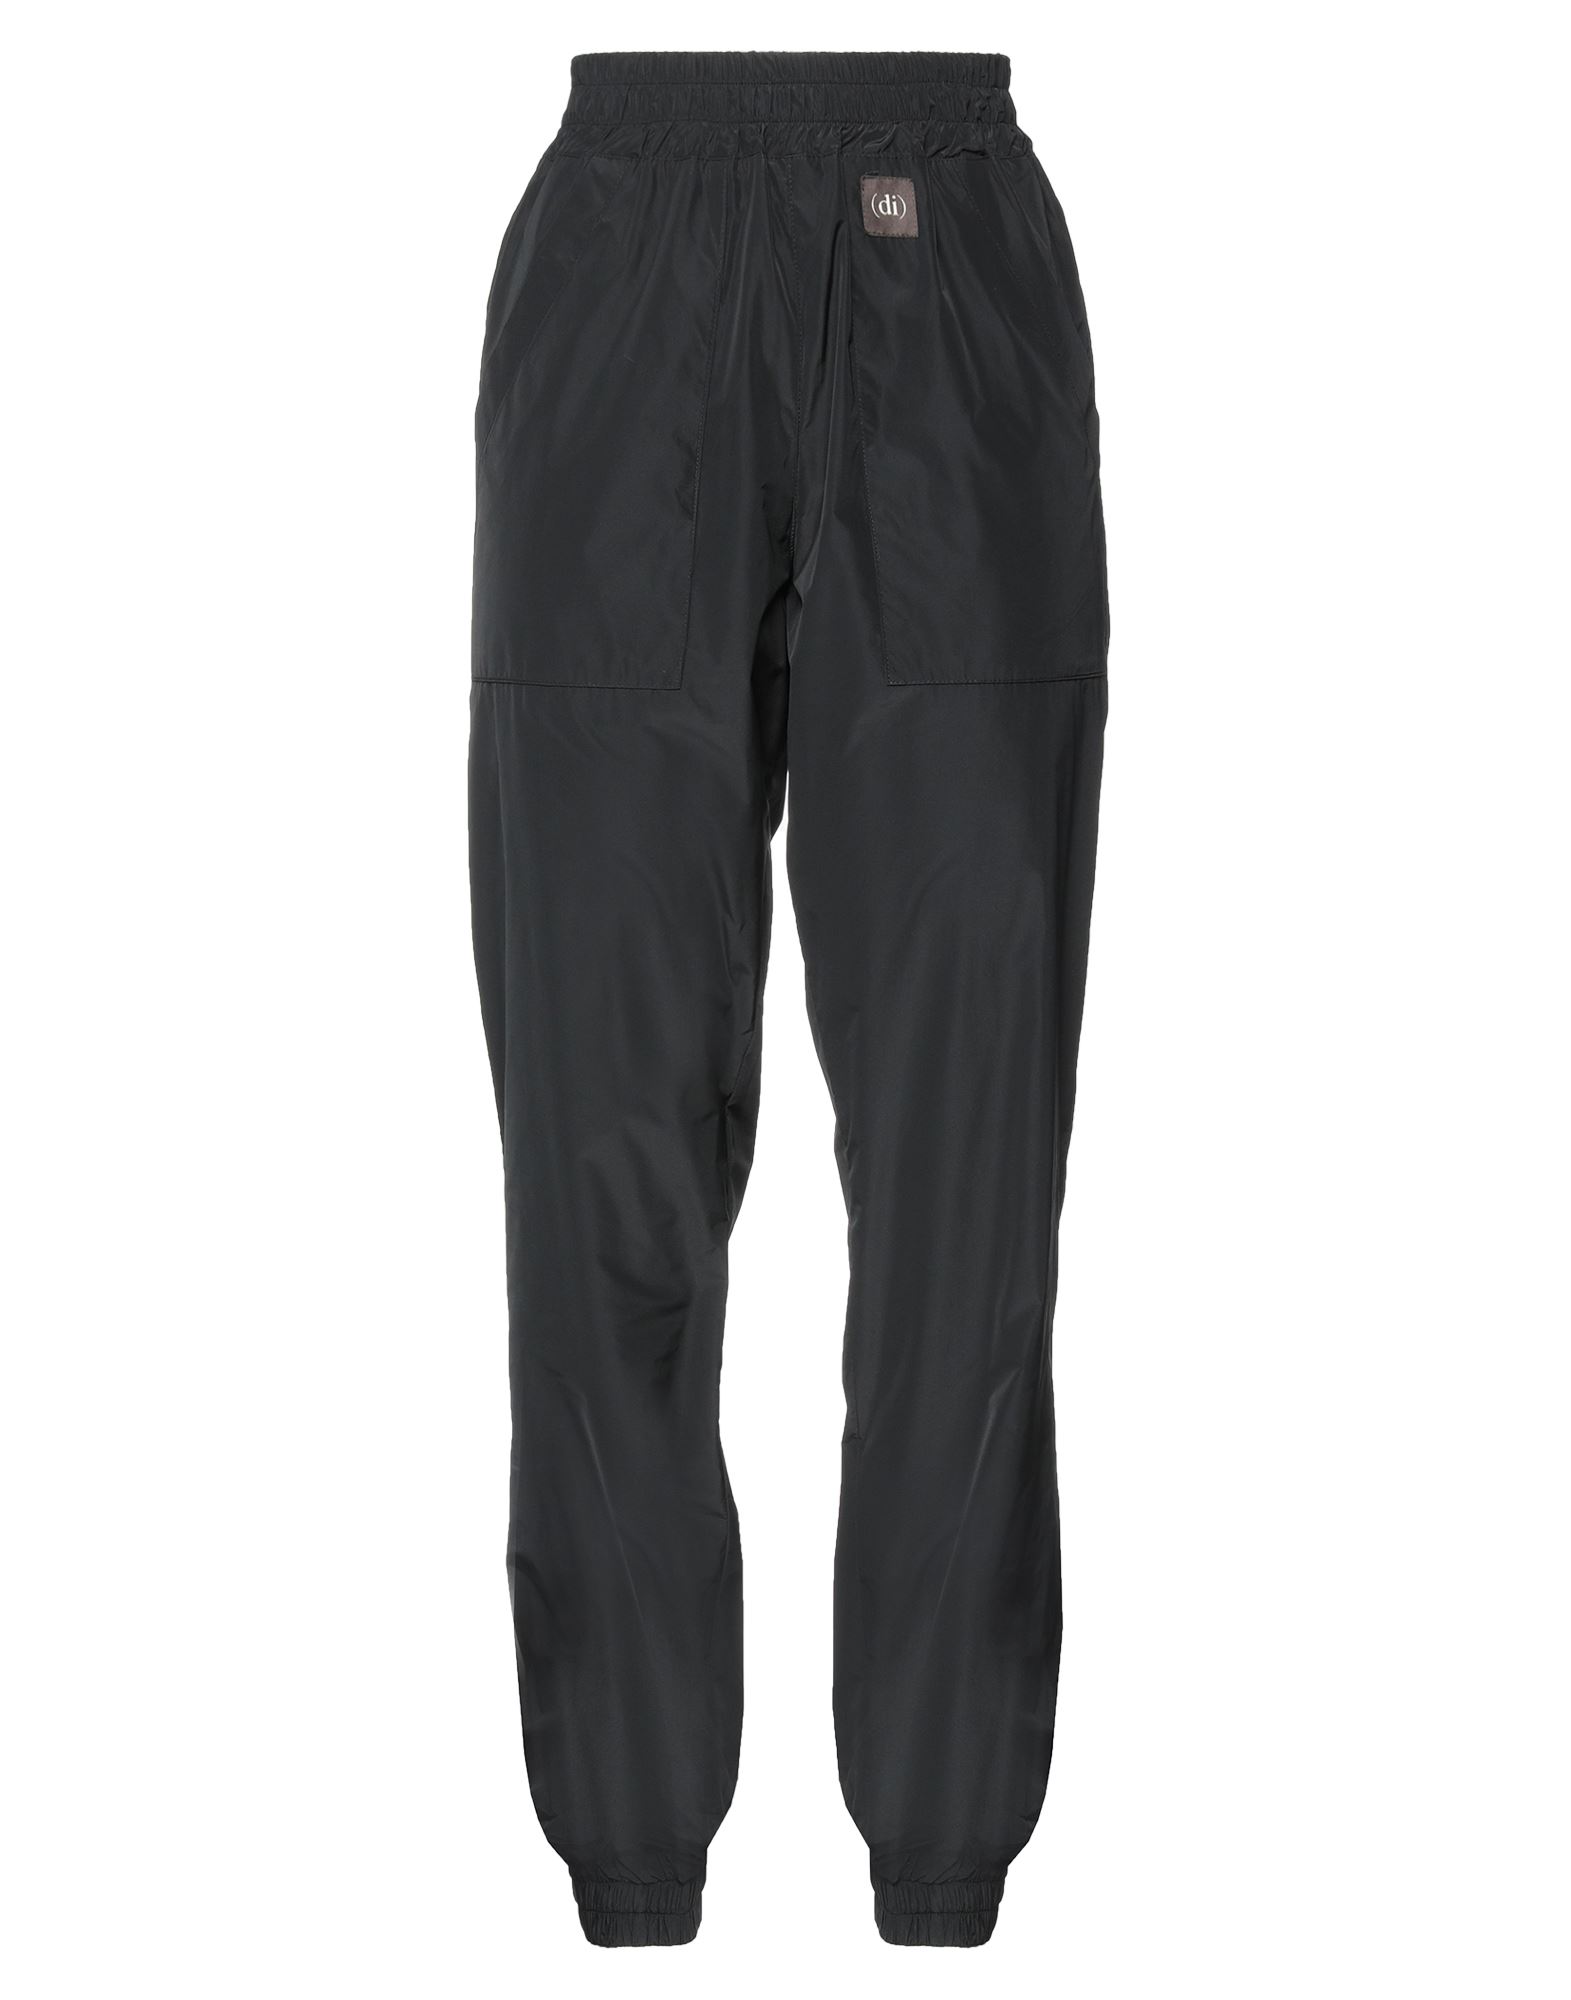 (d)ivision (di)vision Woman Pants Black Size M Polyester